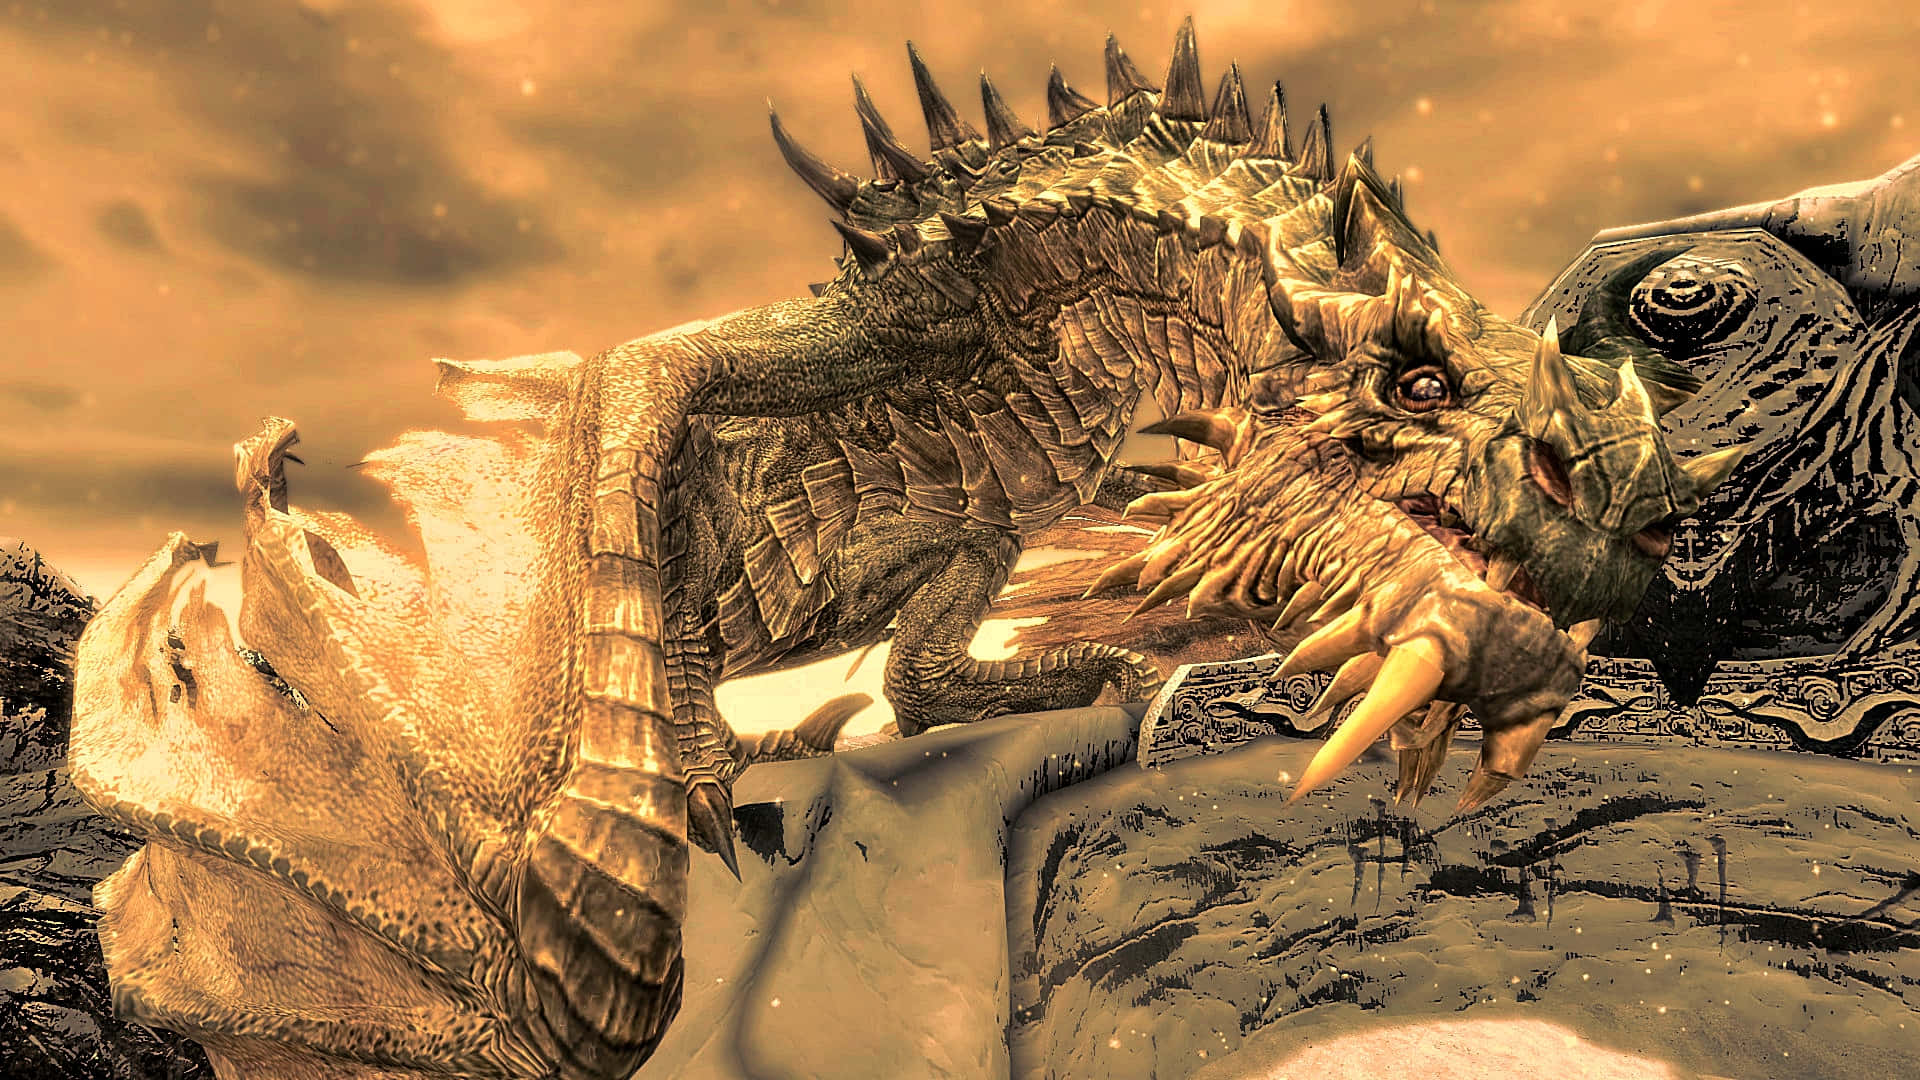 The Ancient Dragon Paarthurnax Perched Atop The Throat of the World in Skyrim Wallpaper